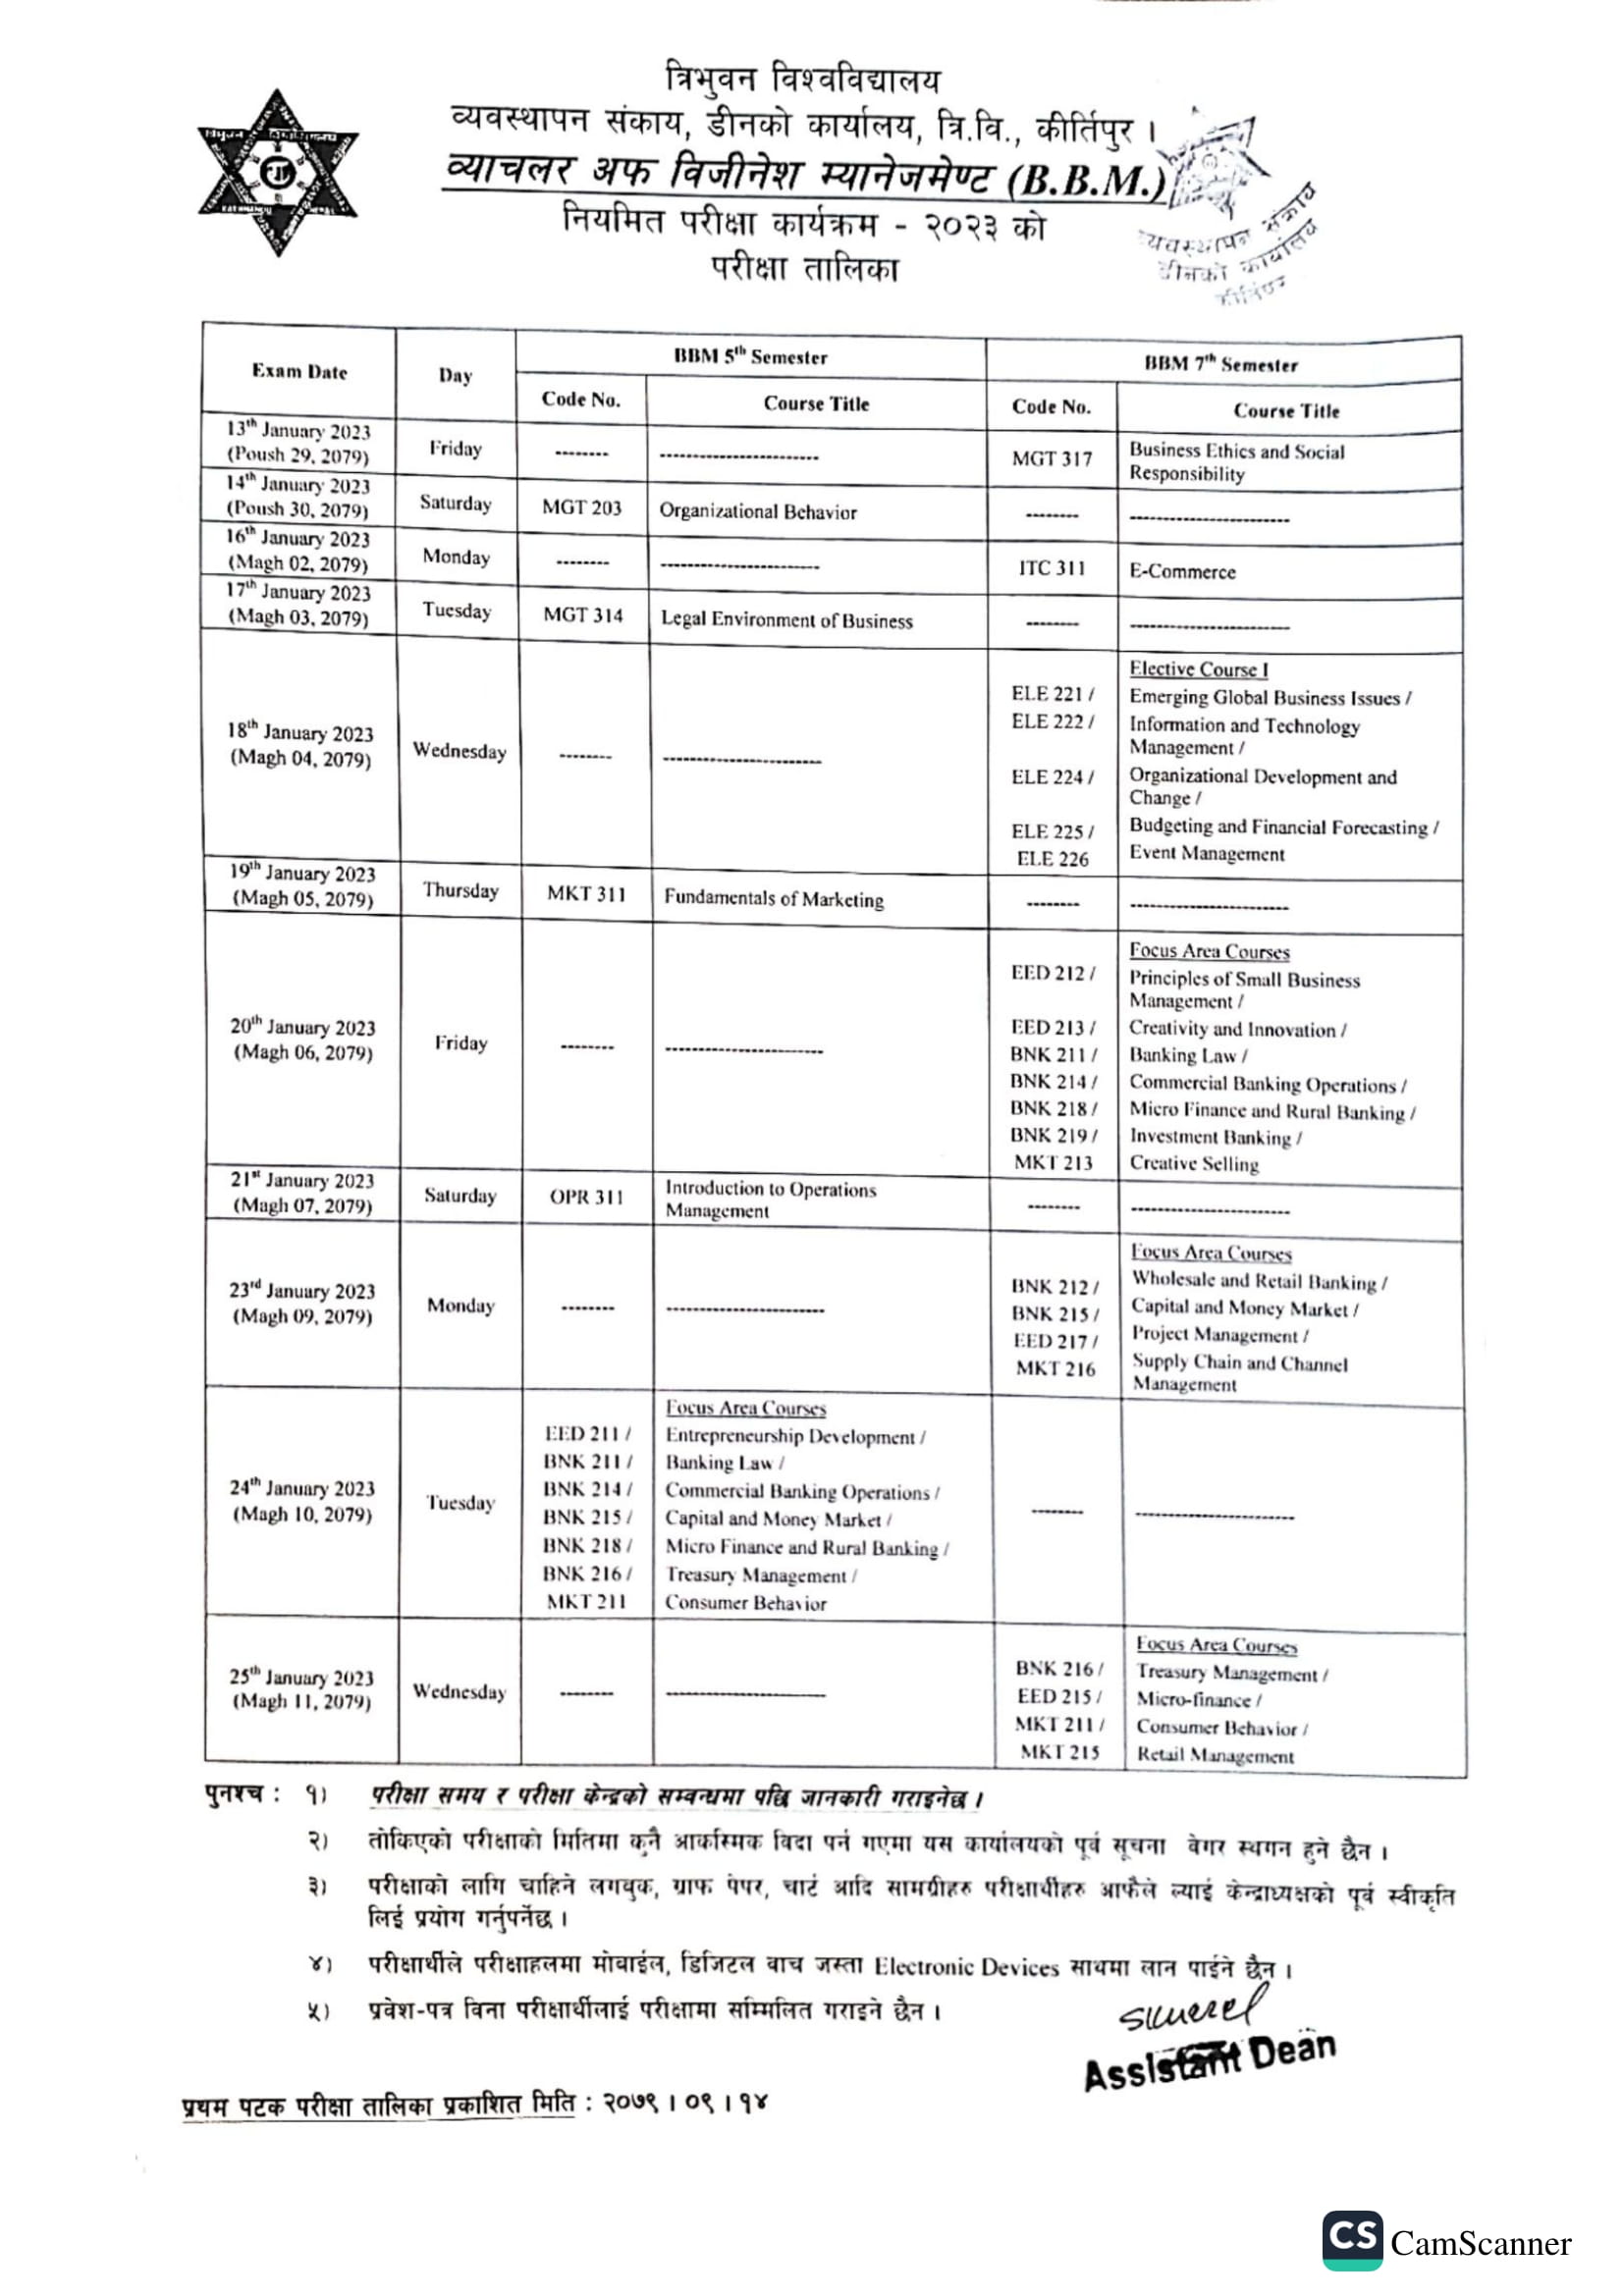 Tribhuvan University Faculty of Management, Dean's Office, TU, Kirtipur has published the examination schedule for Bachelor of Business Management (B.B.M.) 5th semester regular examination program 2023.